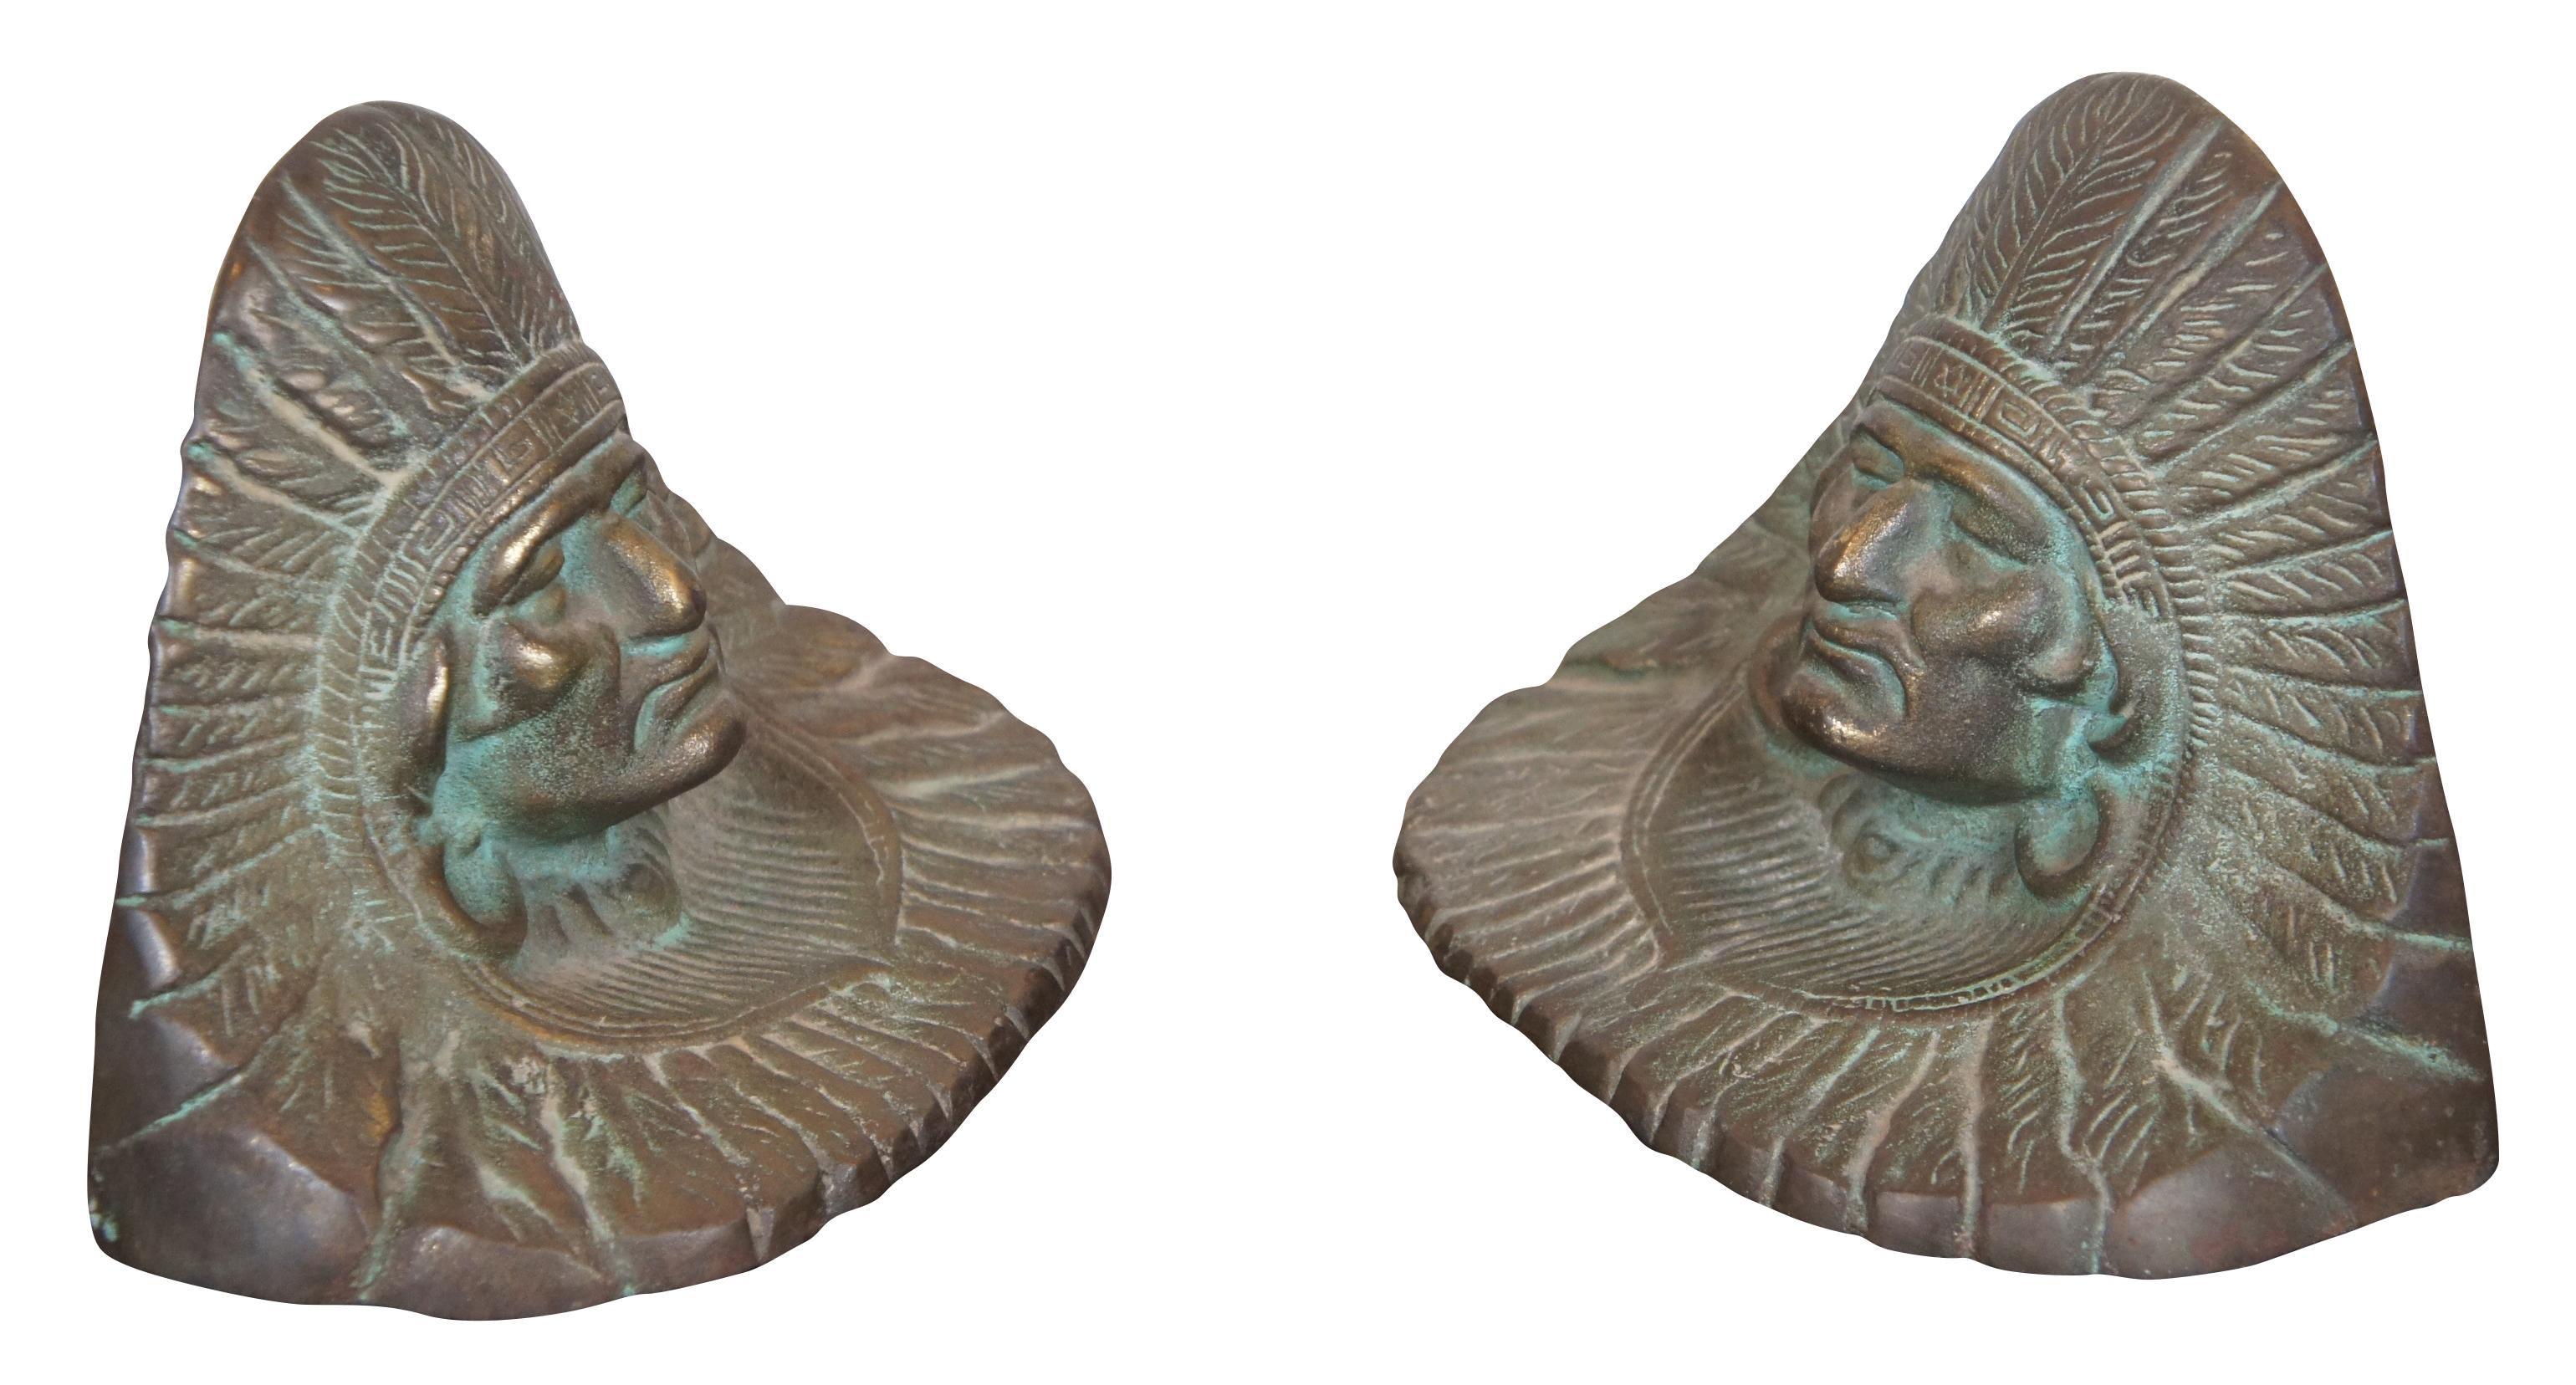 Antique bronze bookends featuring the Bust of a Native American Indian Chief adorned with headdress. Attributed to VR Sturtevant.